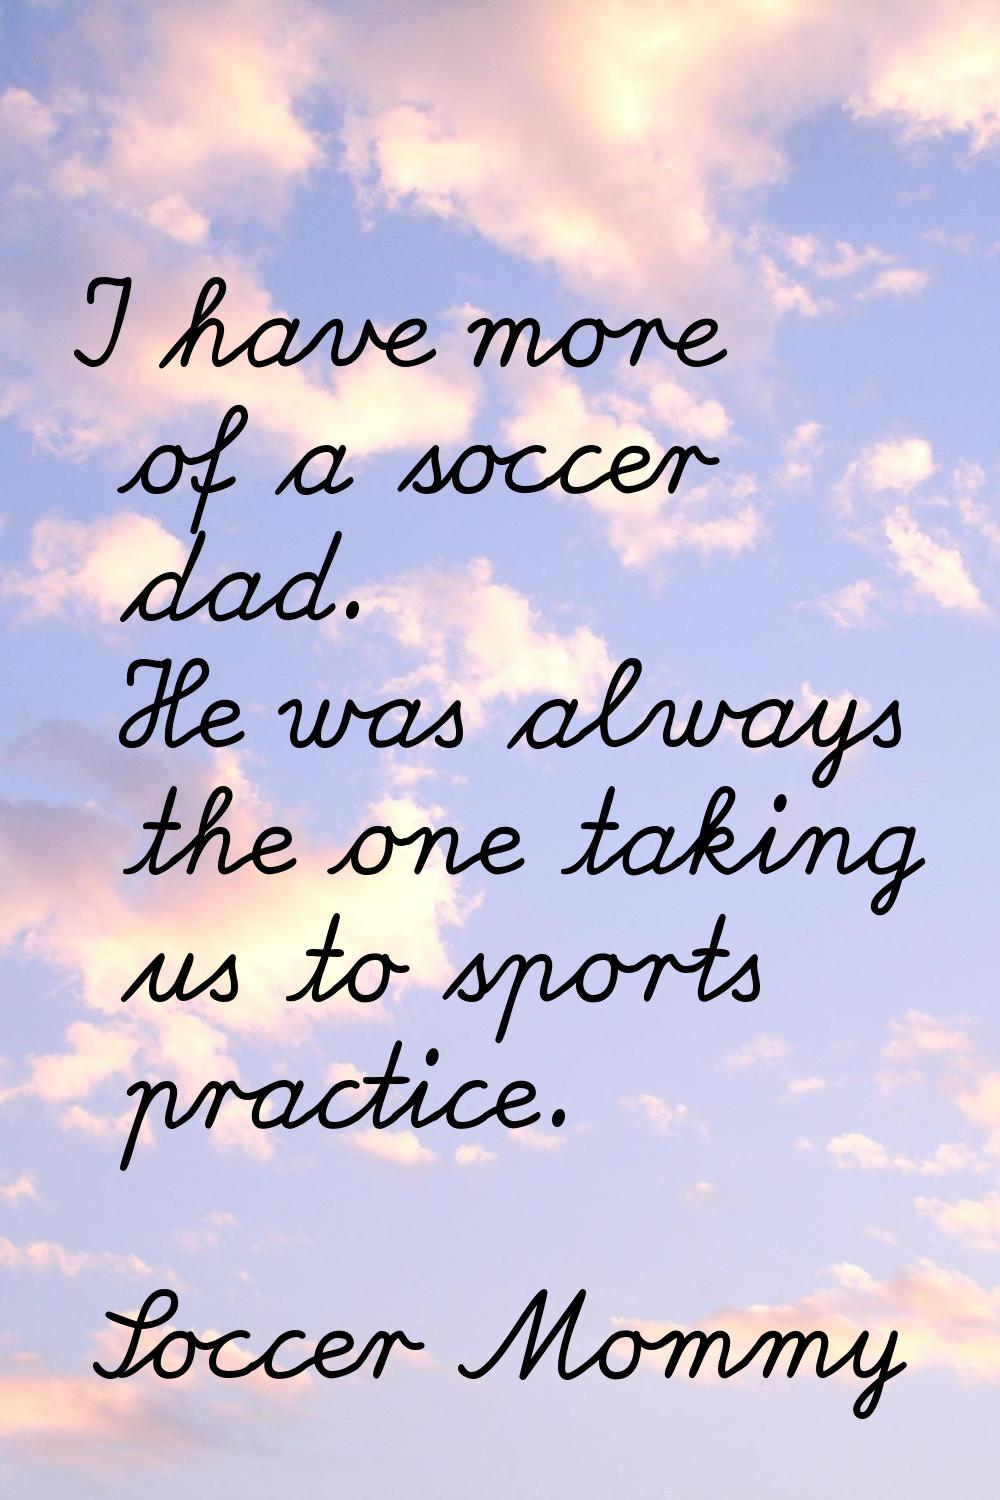 I have more of a soccer dad. He was always the one taking us to sports practice.